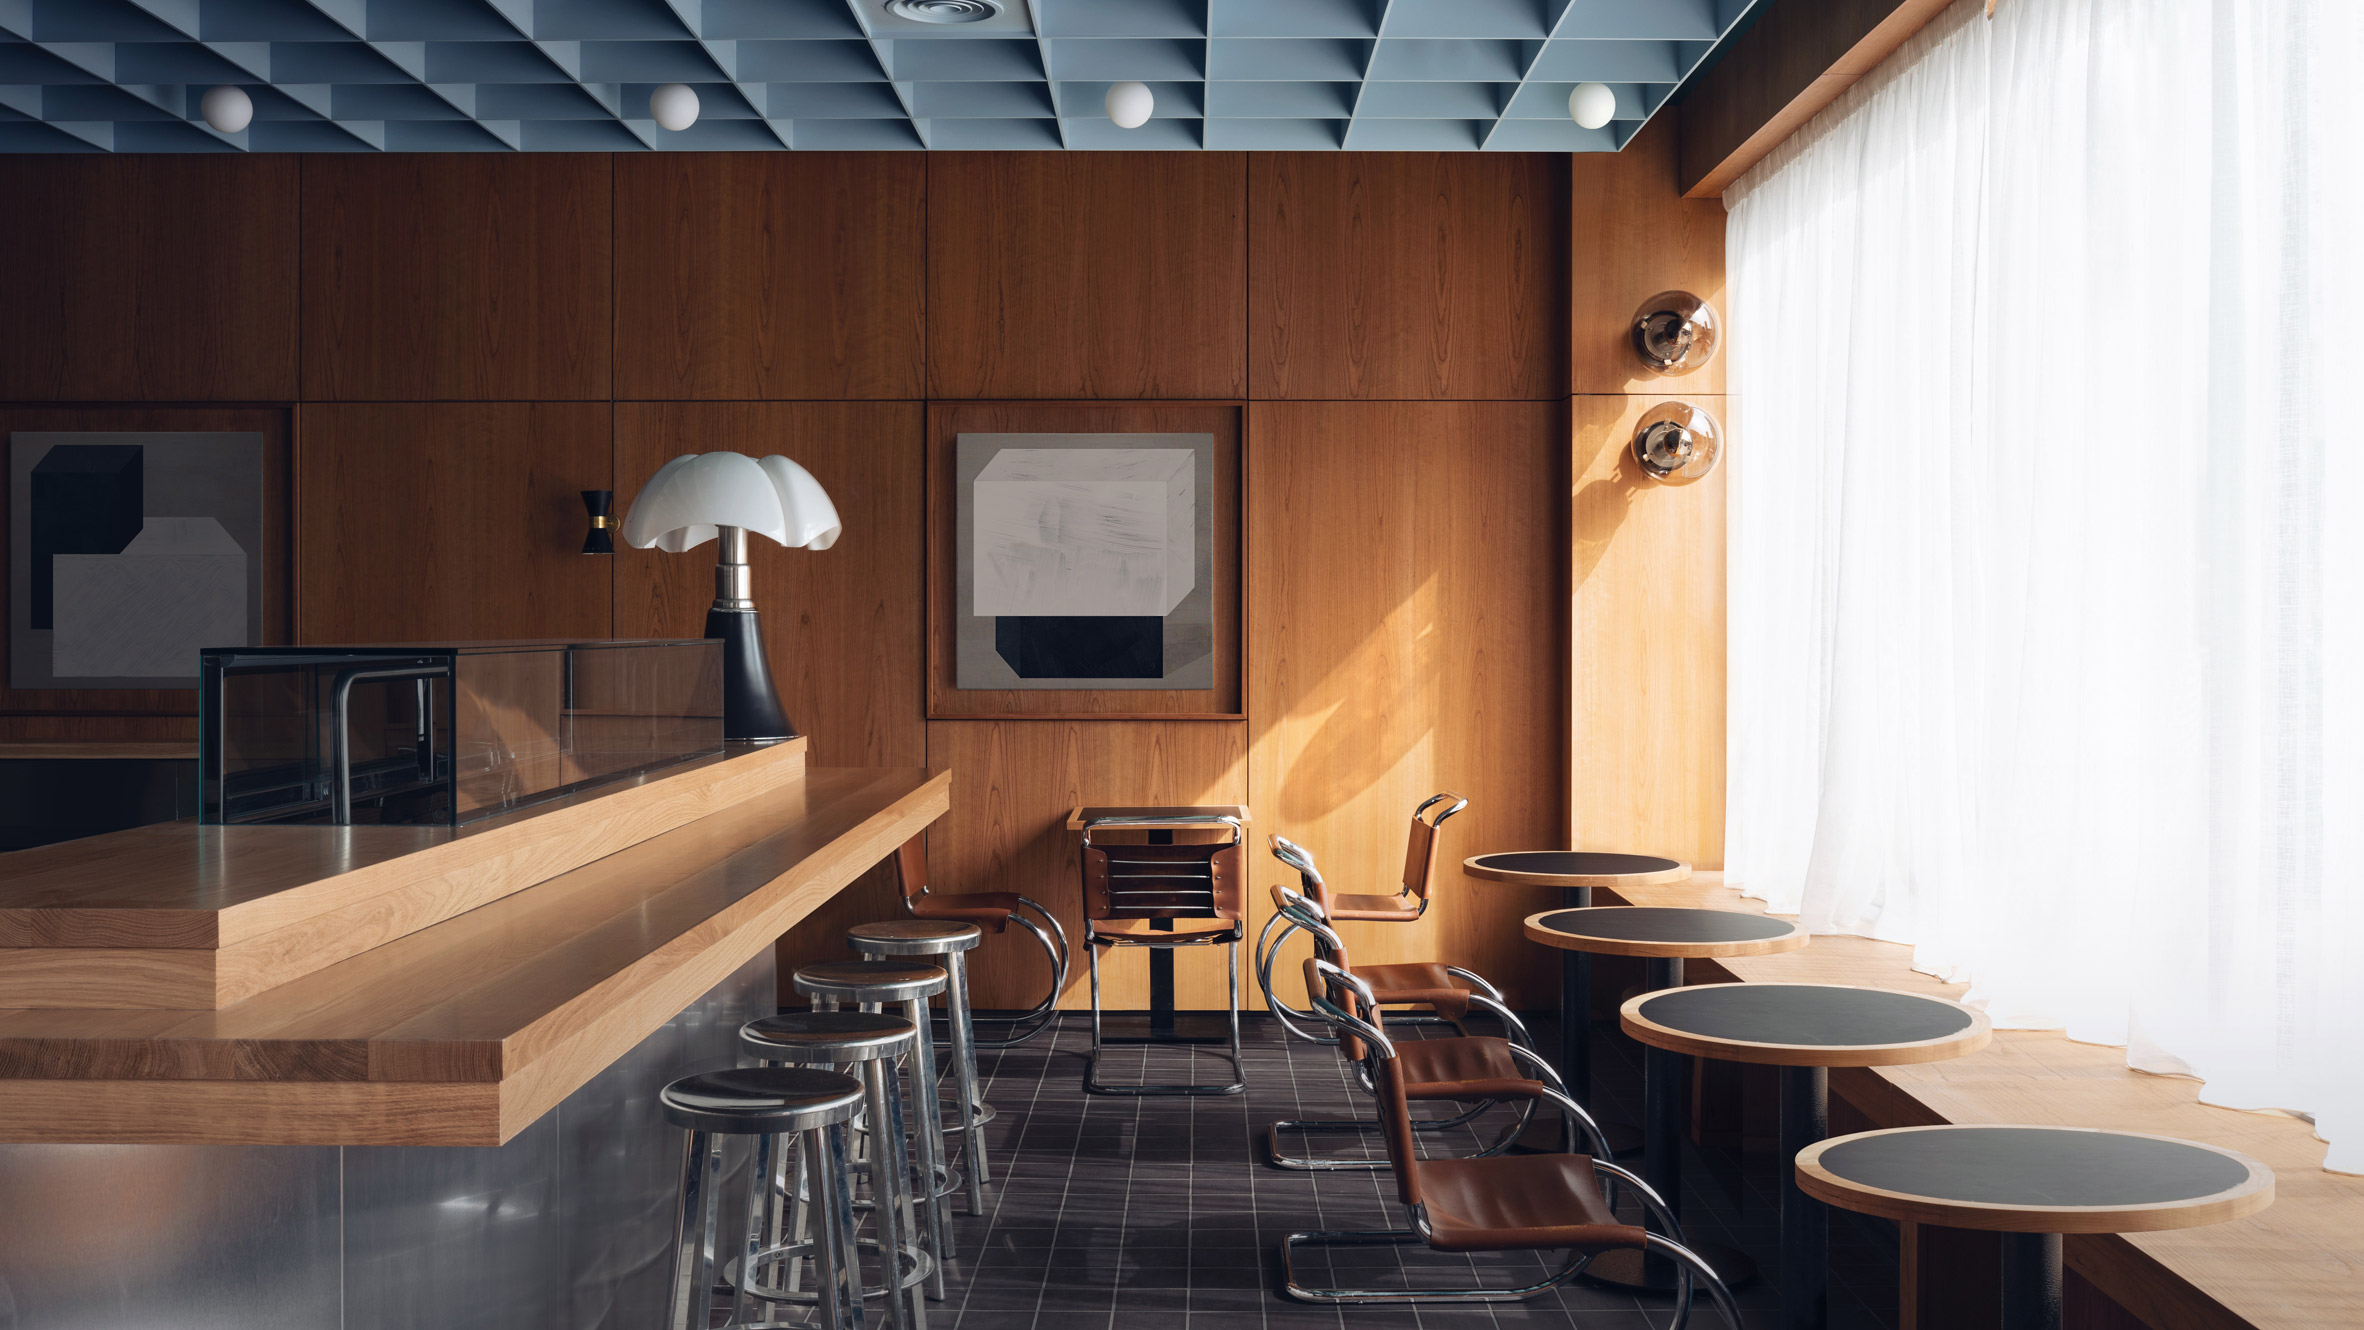 Maido restaurant by Child Studio with cherry wood panelling and soft blue coffered ceiling